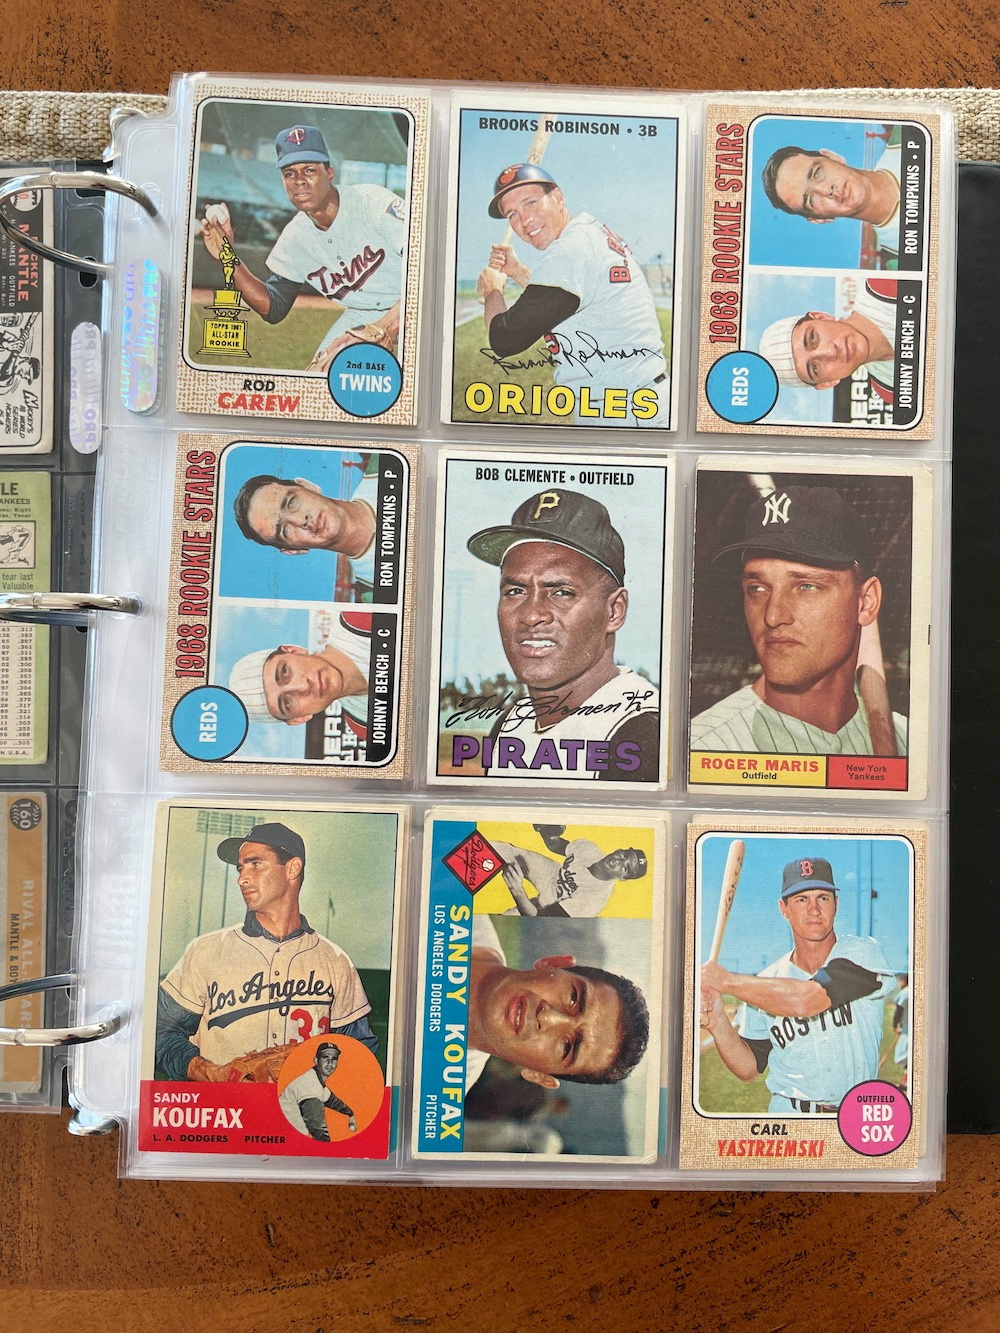 My mother forgot my birthday once': Baseball cards reveal personal